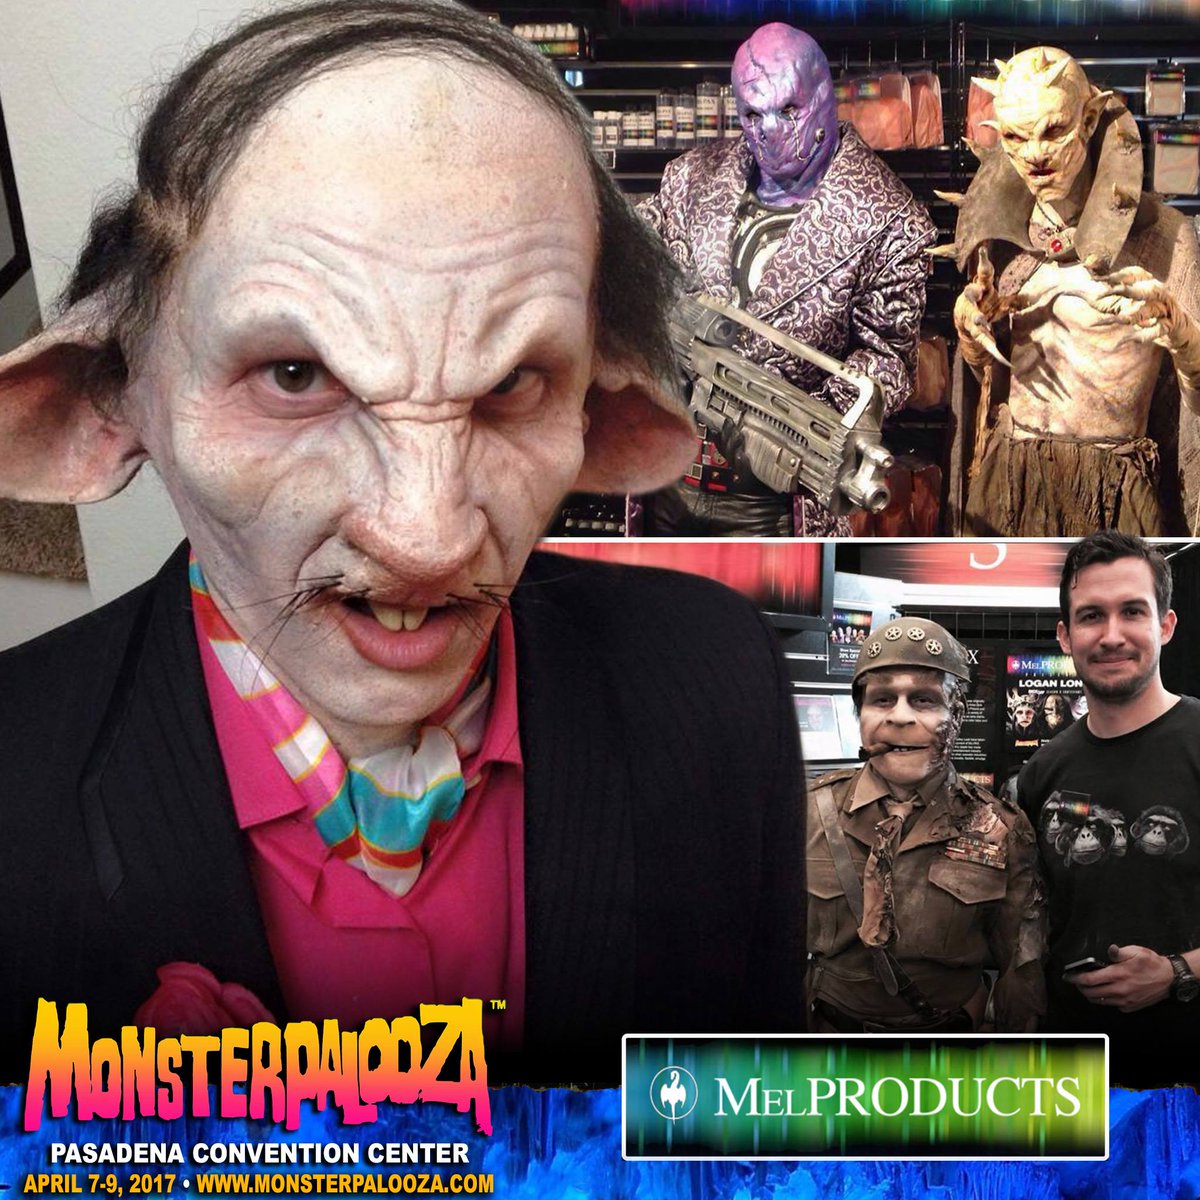 Check out the @MelProducts booth for tons of #makeup products & demos at #Monsterpalooza! April 7-9!
➨ goo.gl/vp0BpK